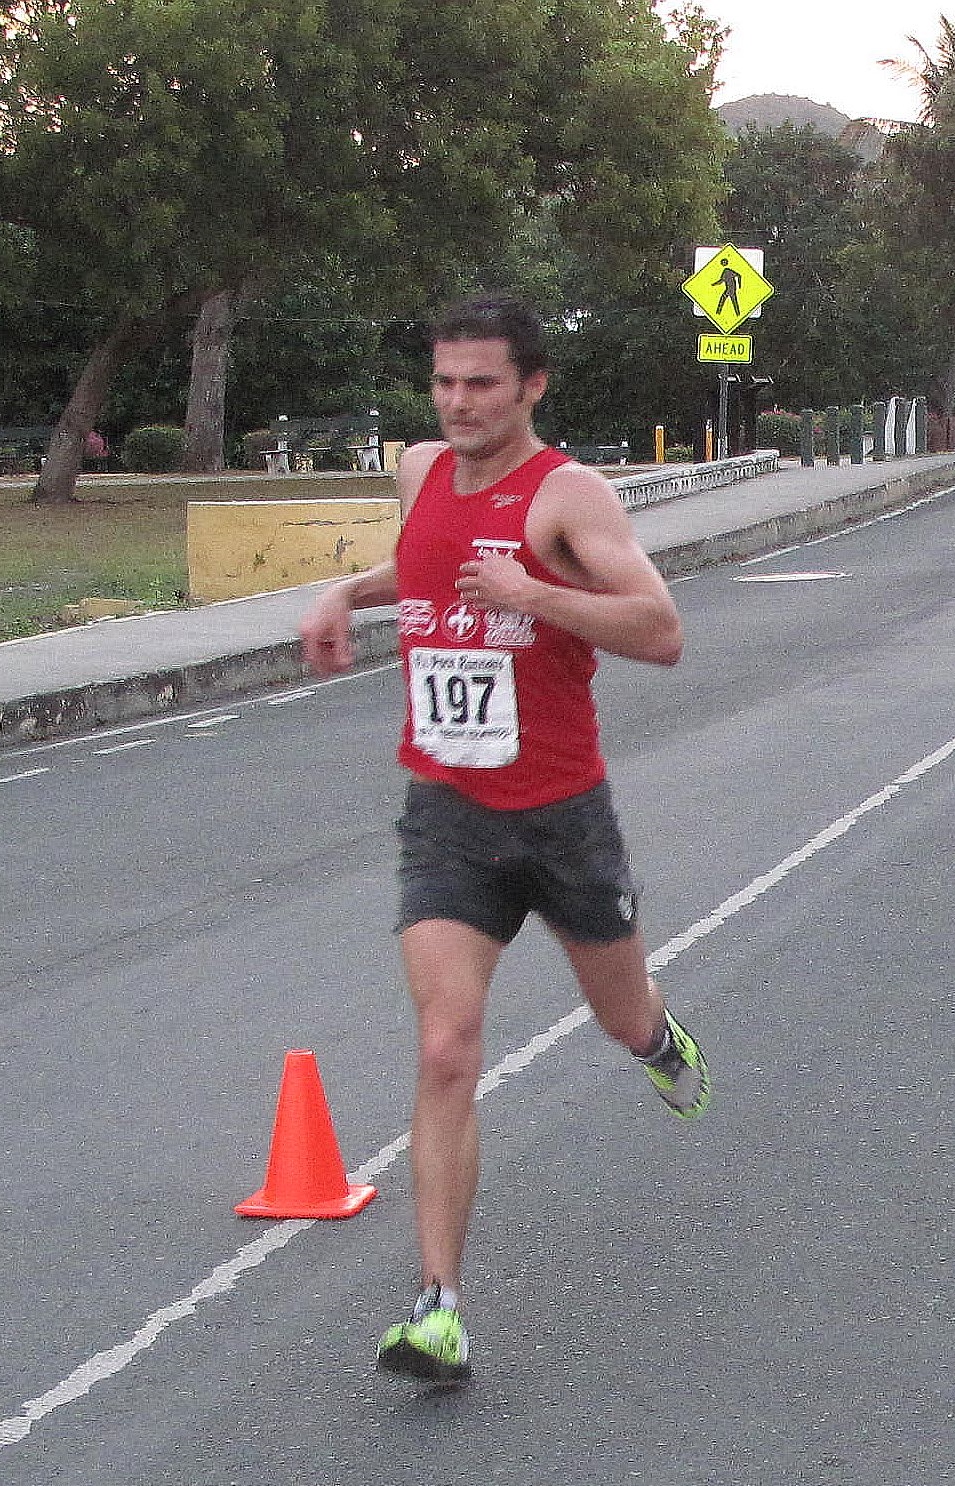 Nick Arcardo, winner of the 29th Annual Toast-To-The-Captain Road Race